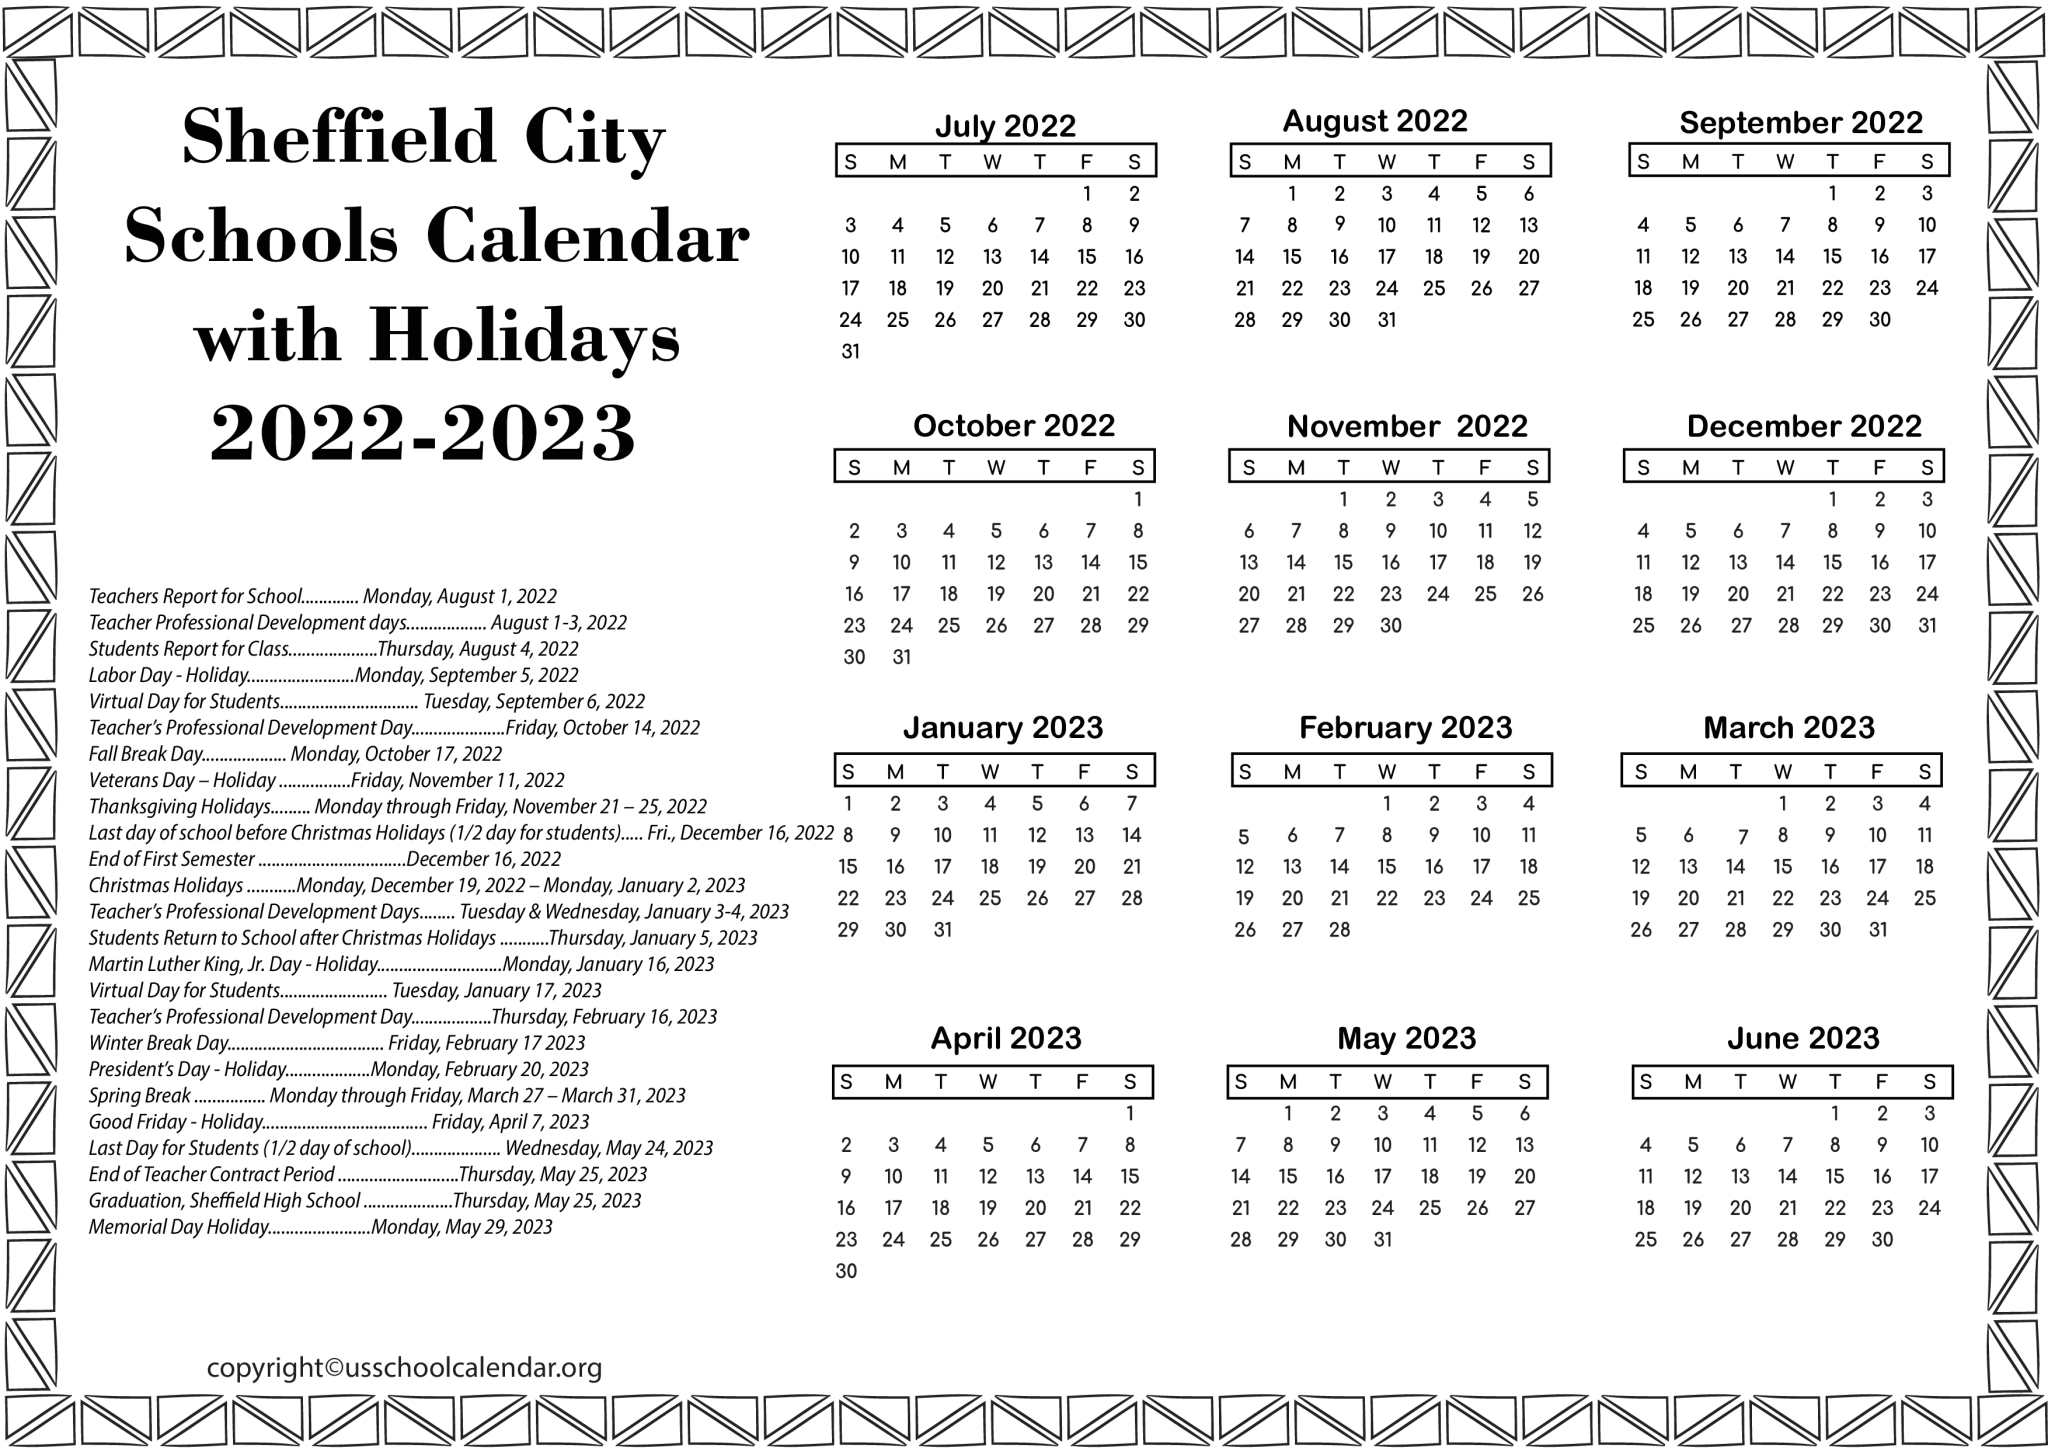 [SCS] Sheffield City Schools Calendar with Holidays 2023